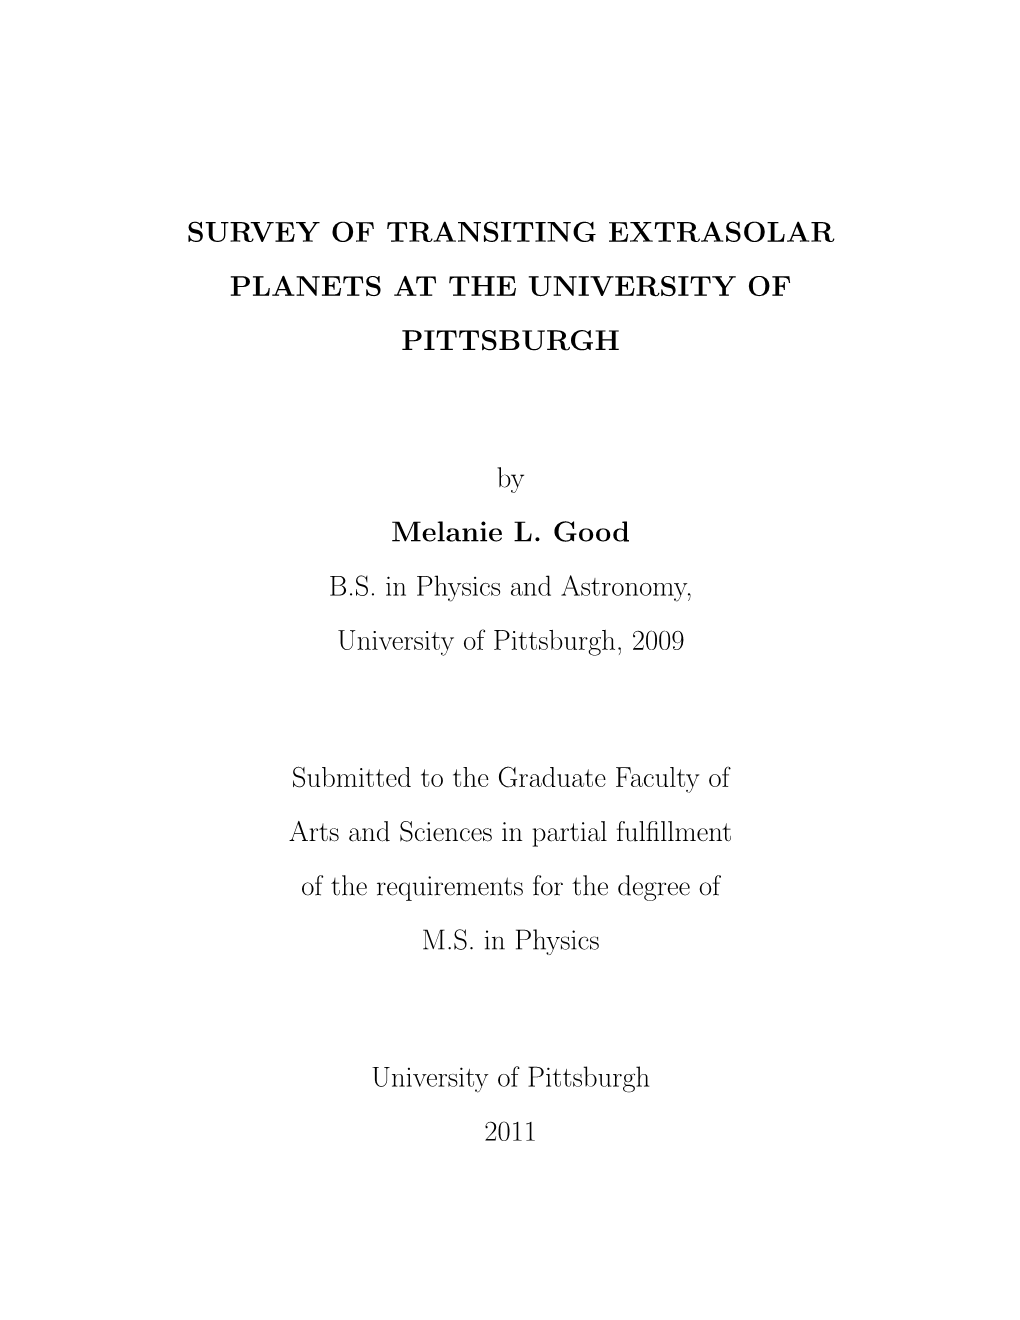 Survey of Transiting Extrasolar Planets at the University of Pittsburgh